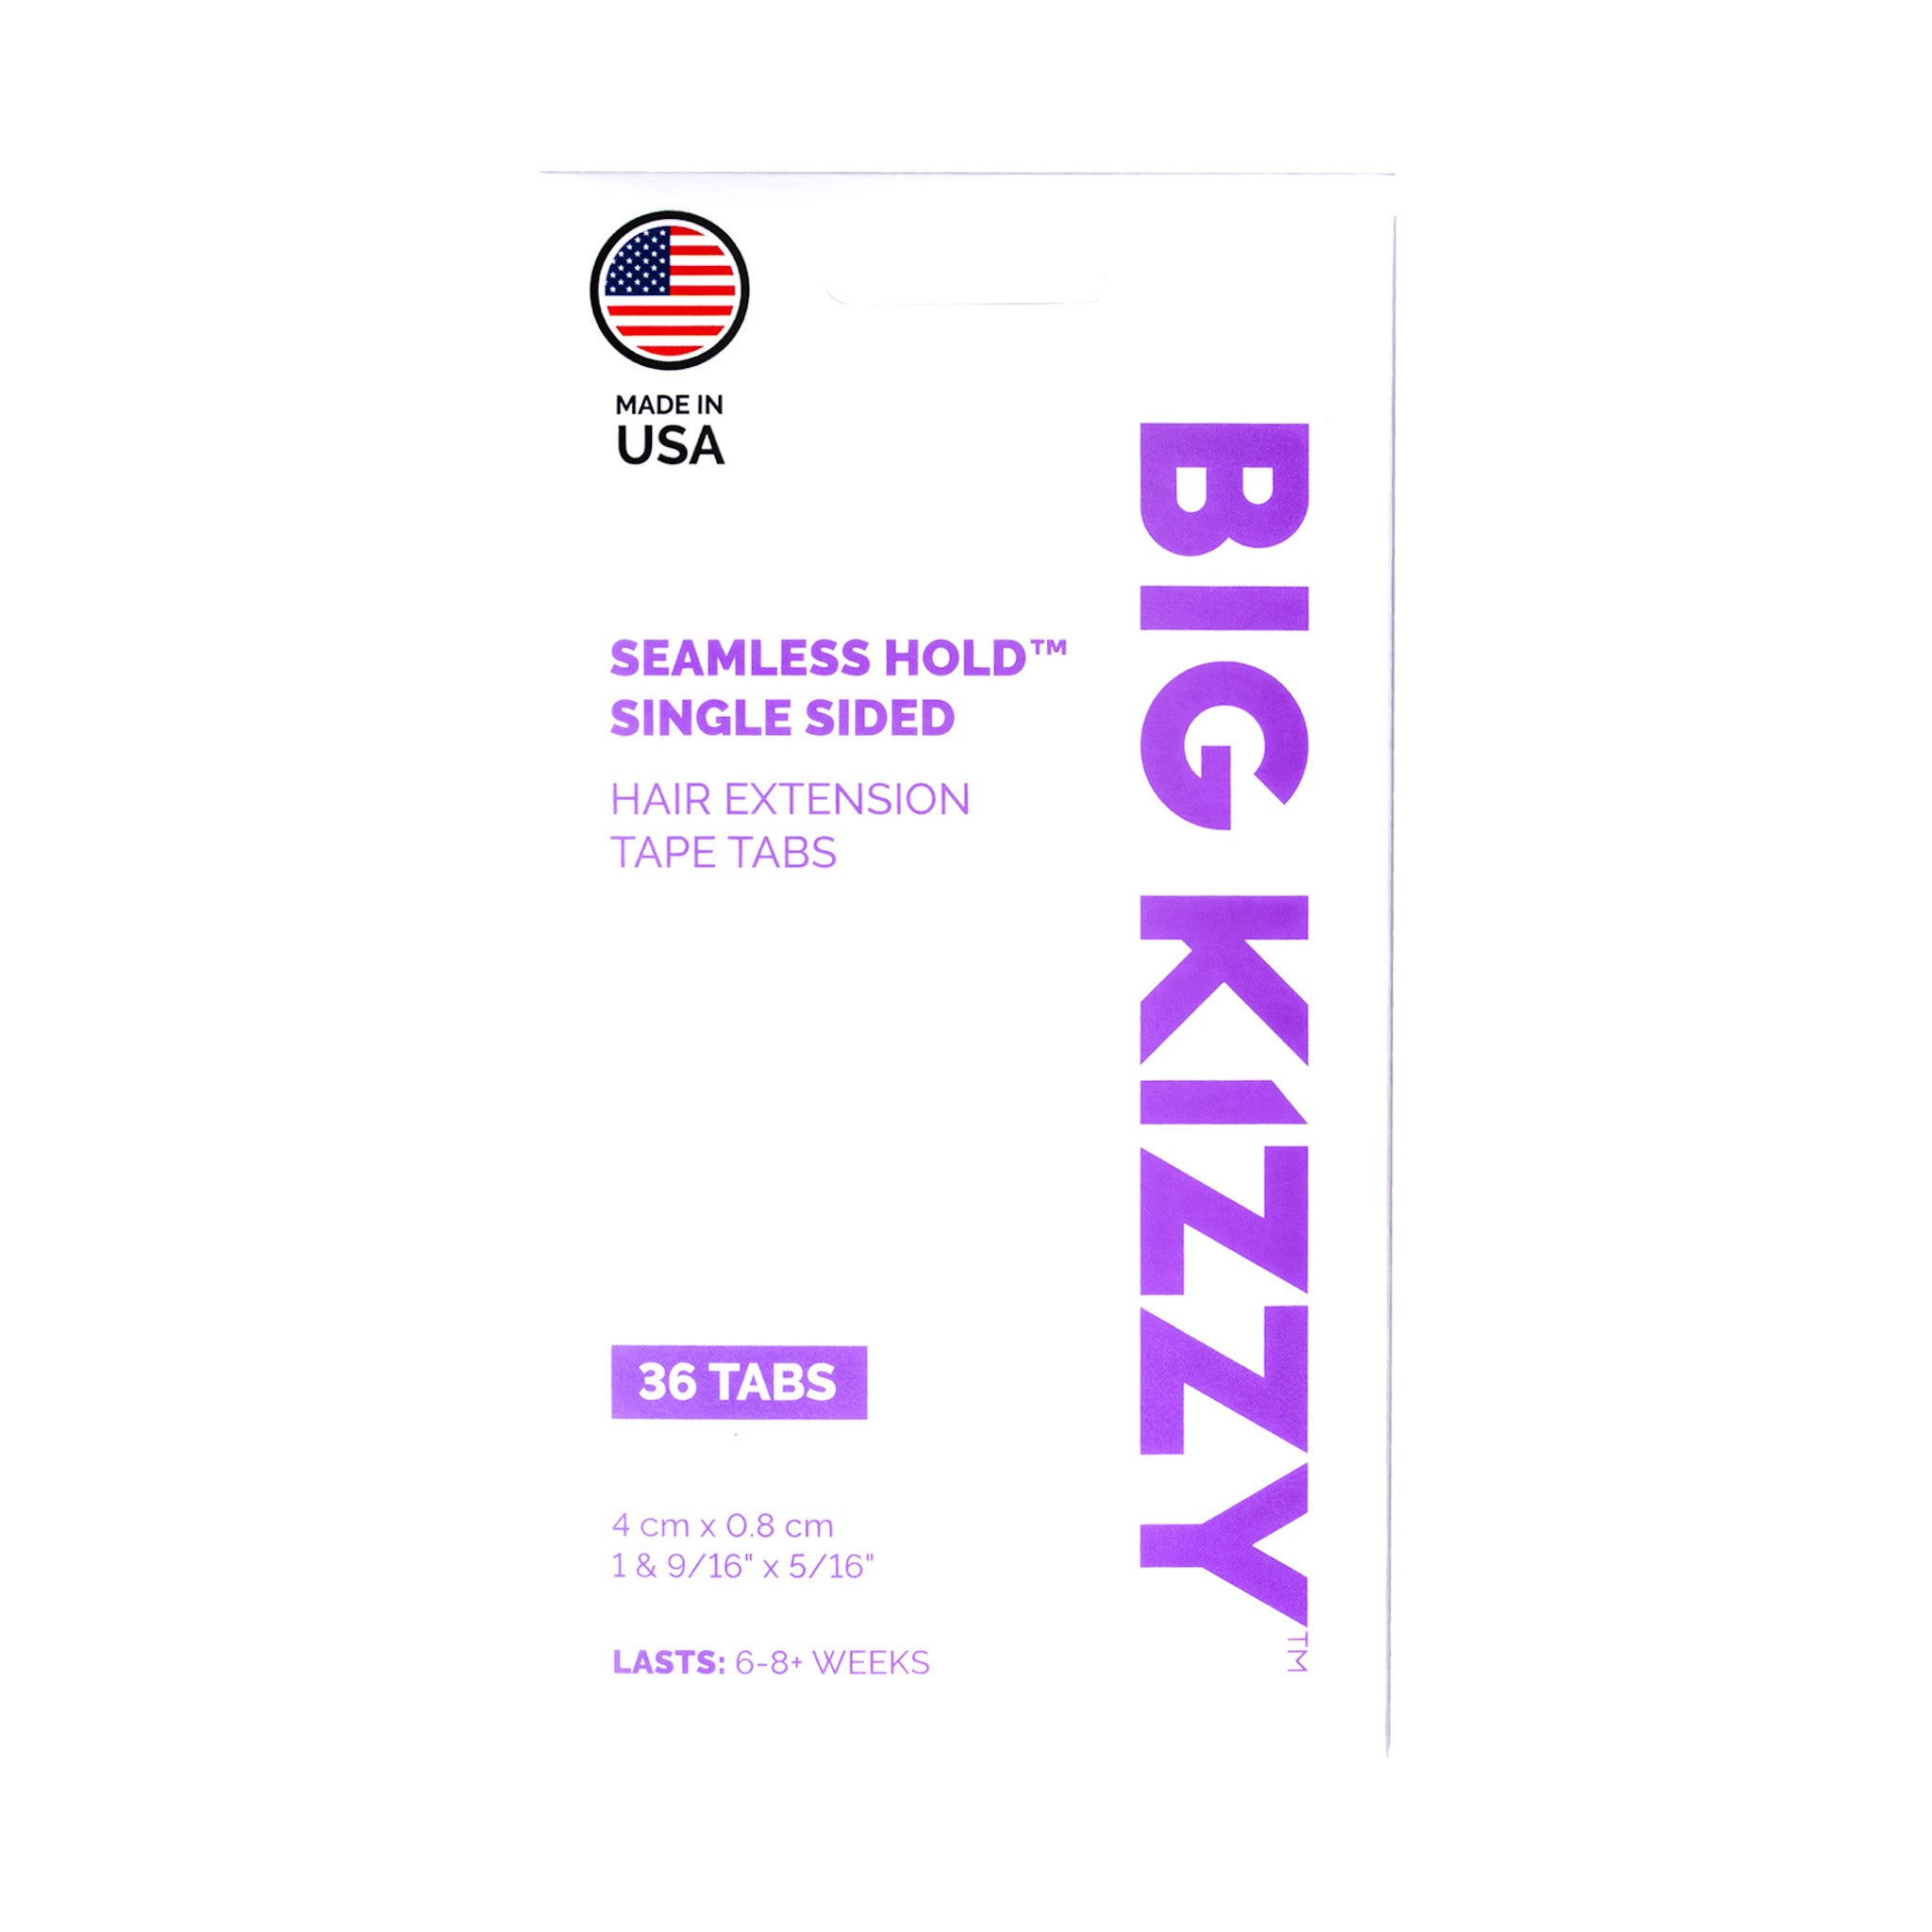 A pack of Big Kizzy® Seamless Hold Single Sided Hair Extension Replacement Tape Tabs, 36 tabs